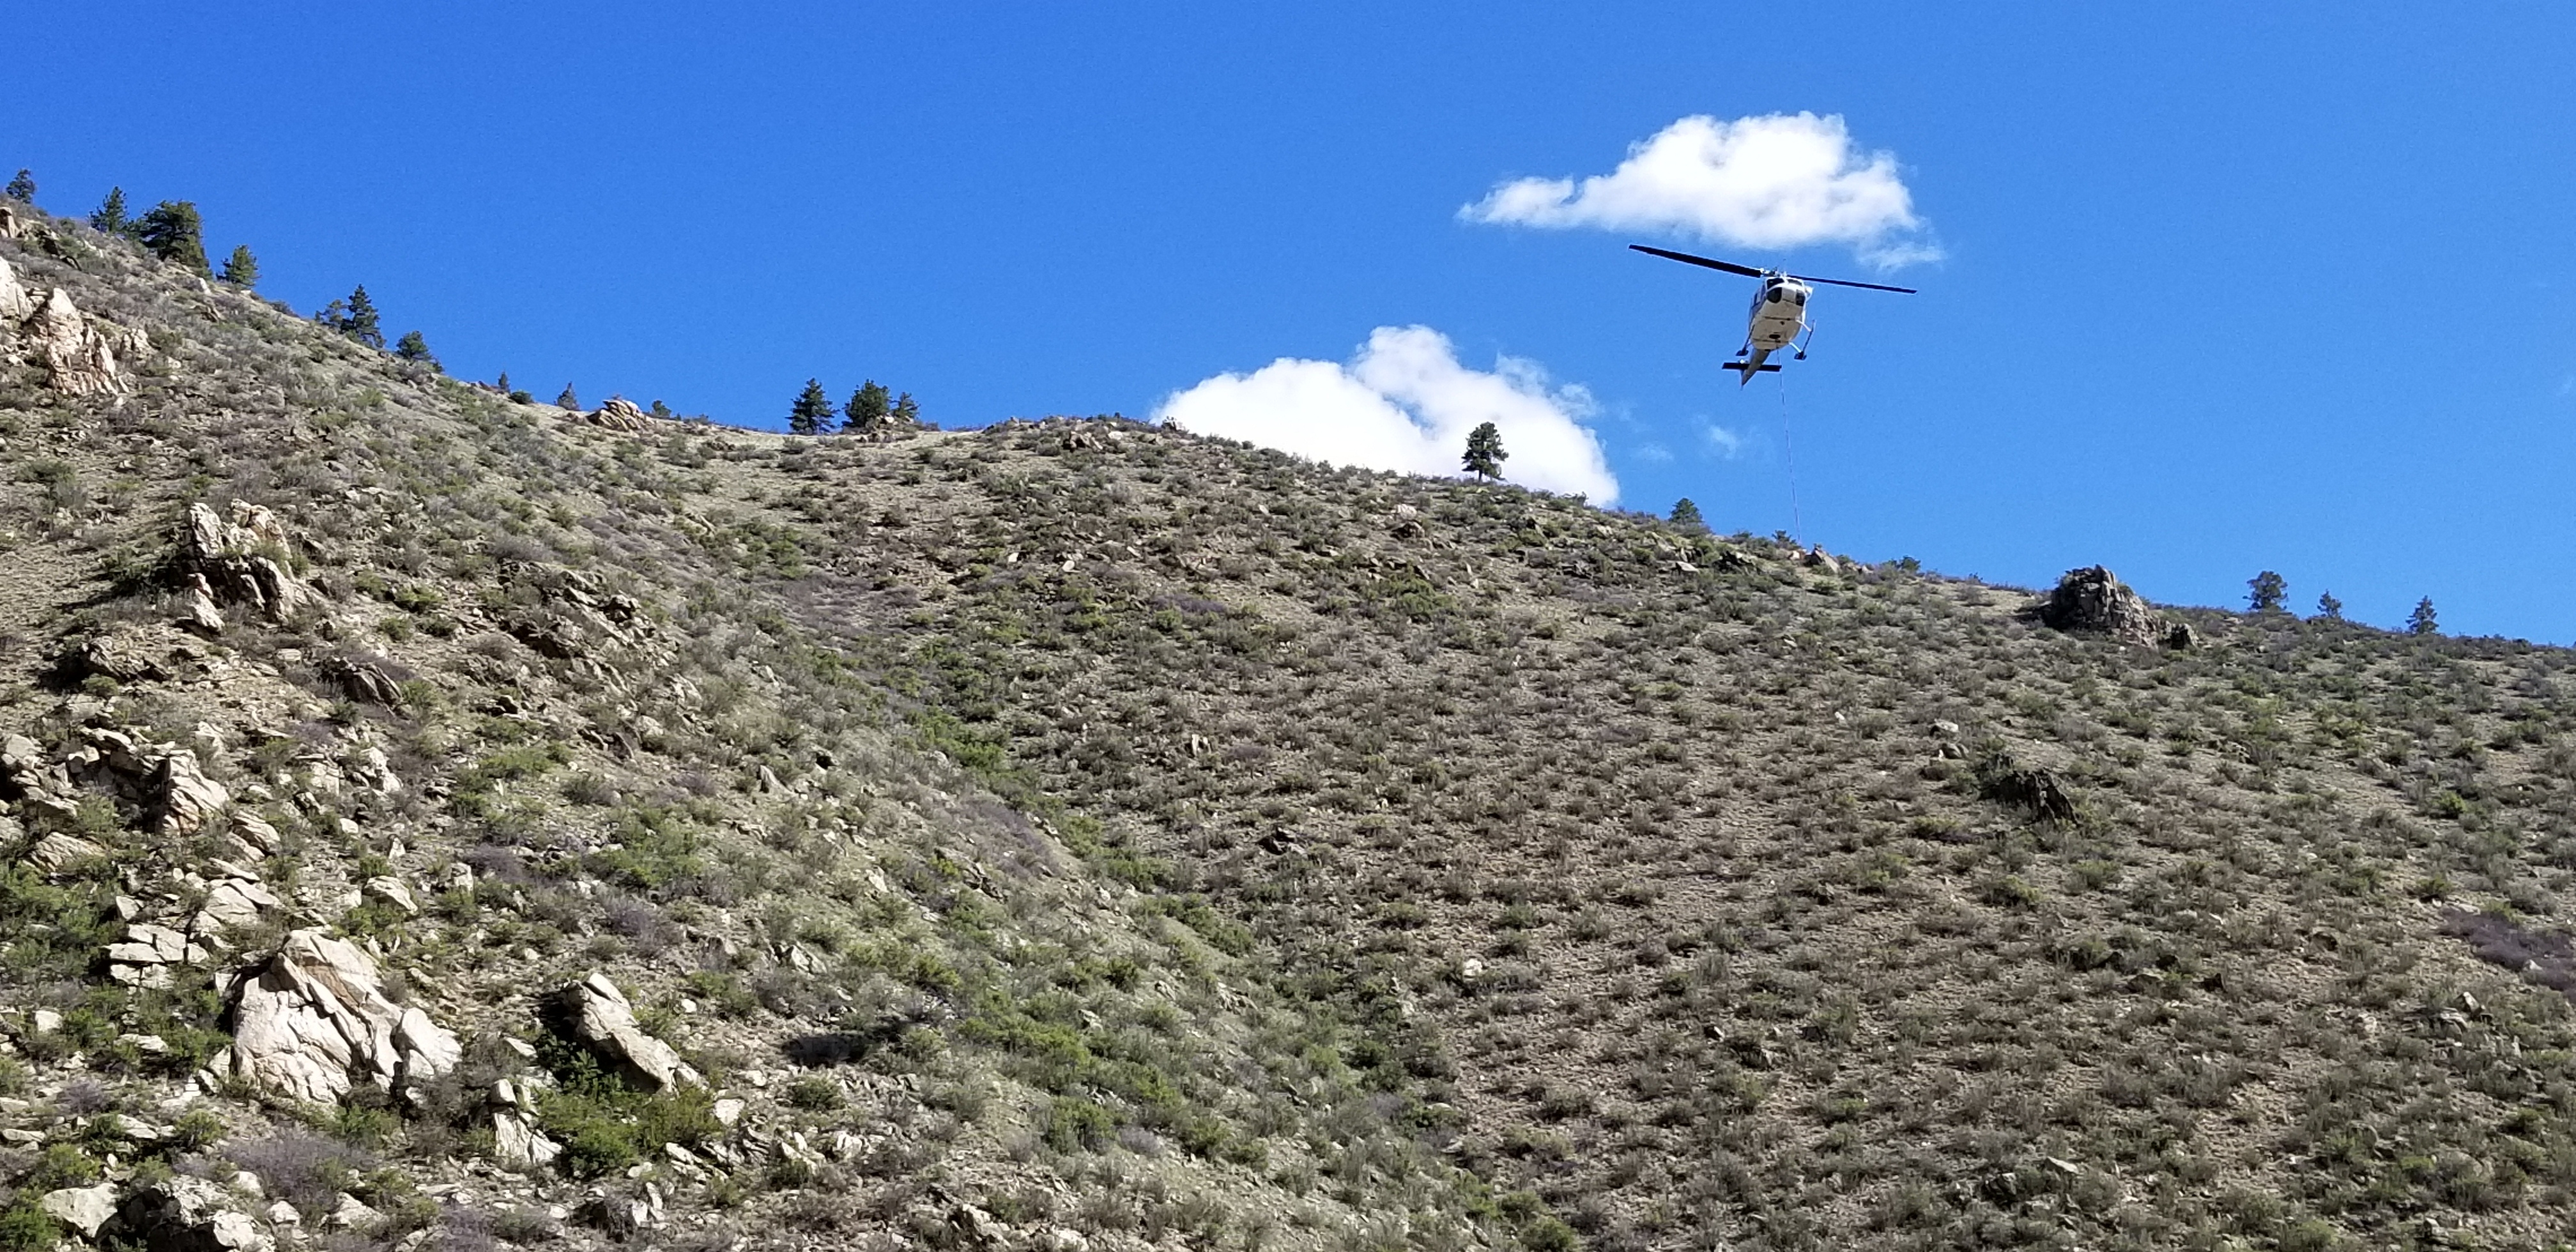 A helicopter was required to place equipment for the first stages of the hydropower upgrade at Roberts Tunnel.